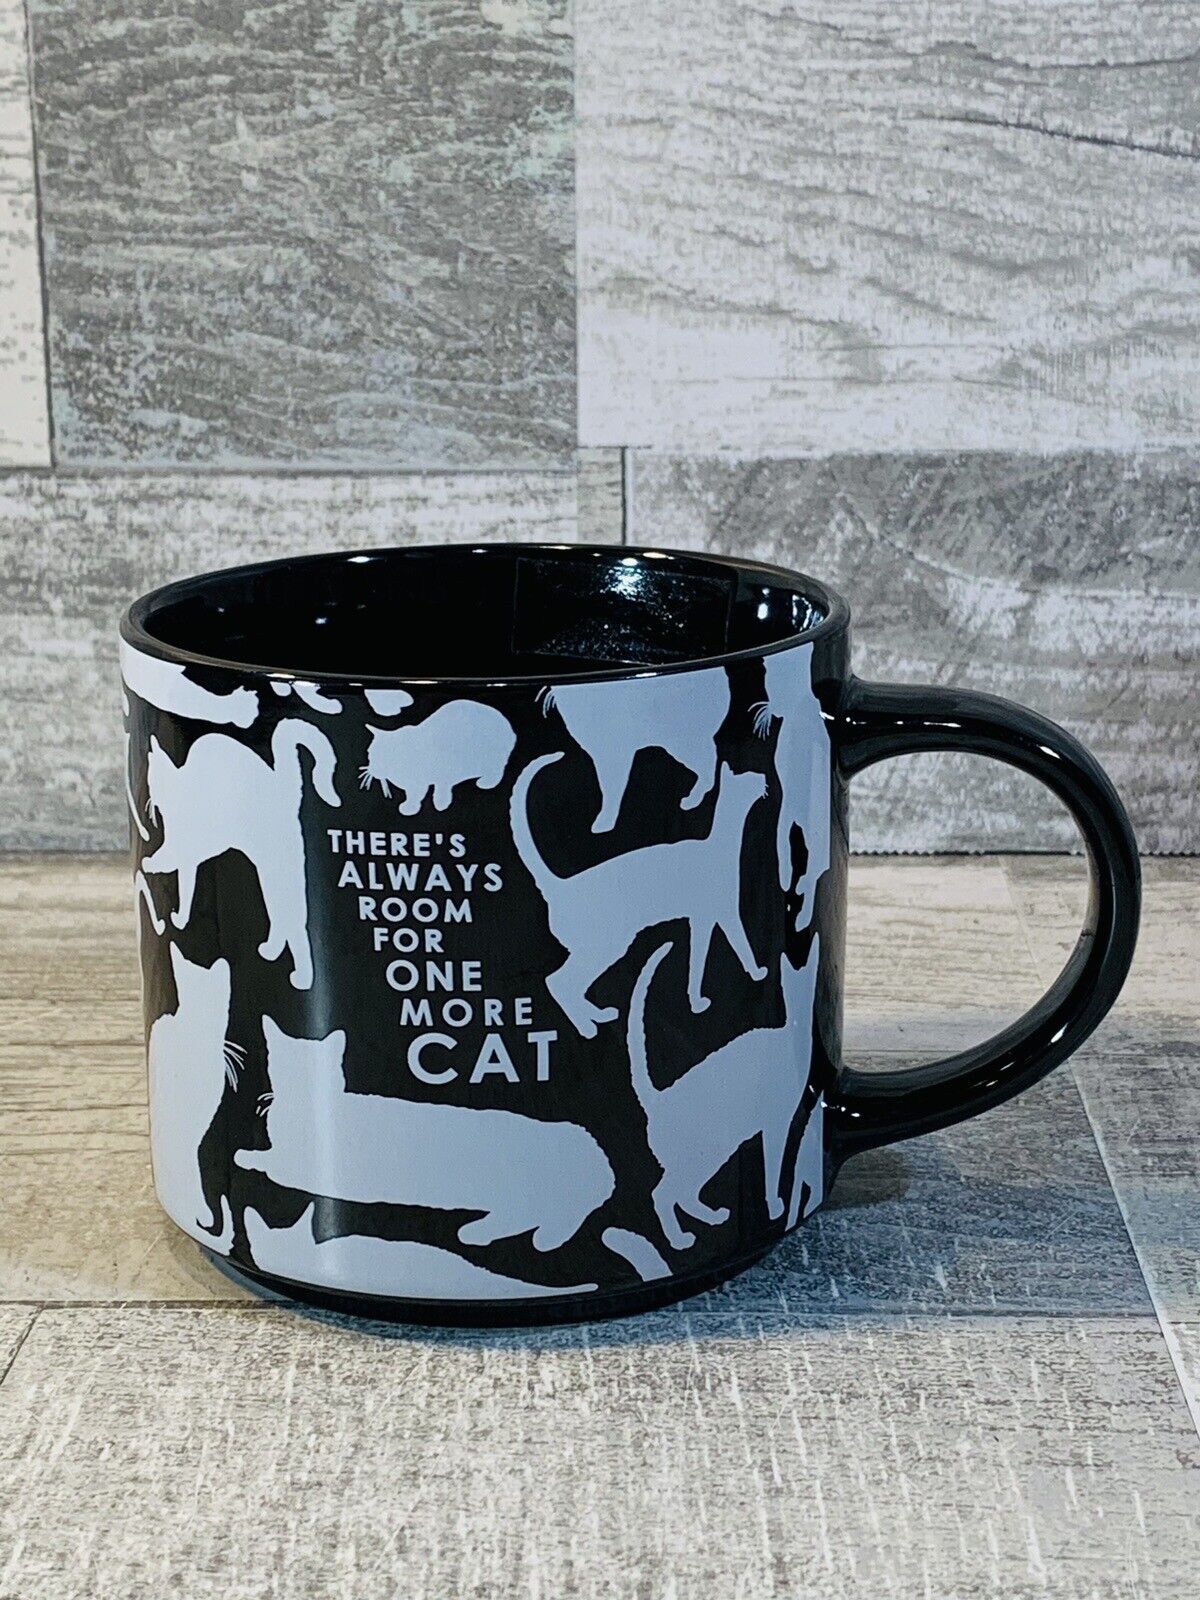 John Bartlett “There’s Always Room For One More Cat” Large Black Coffee Mug